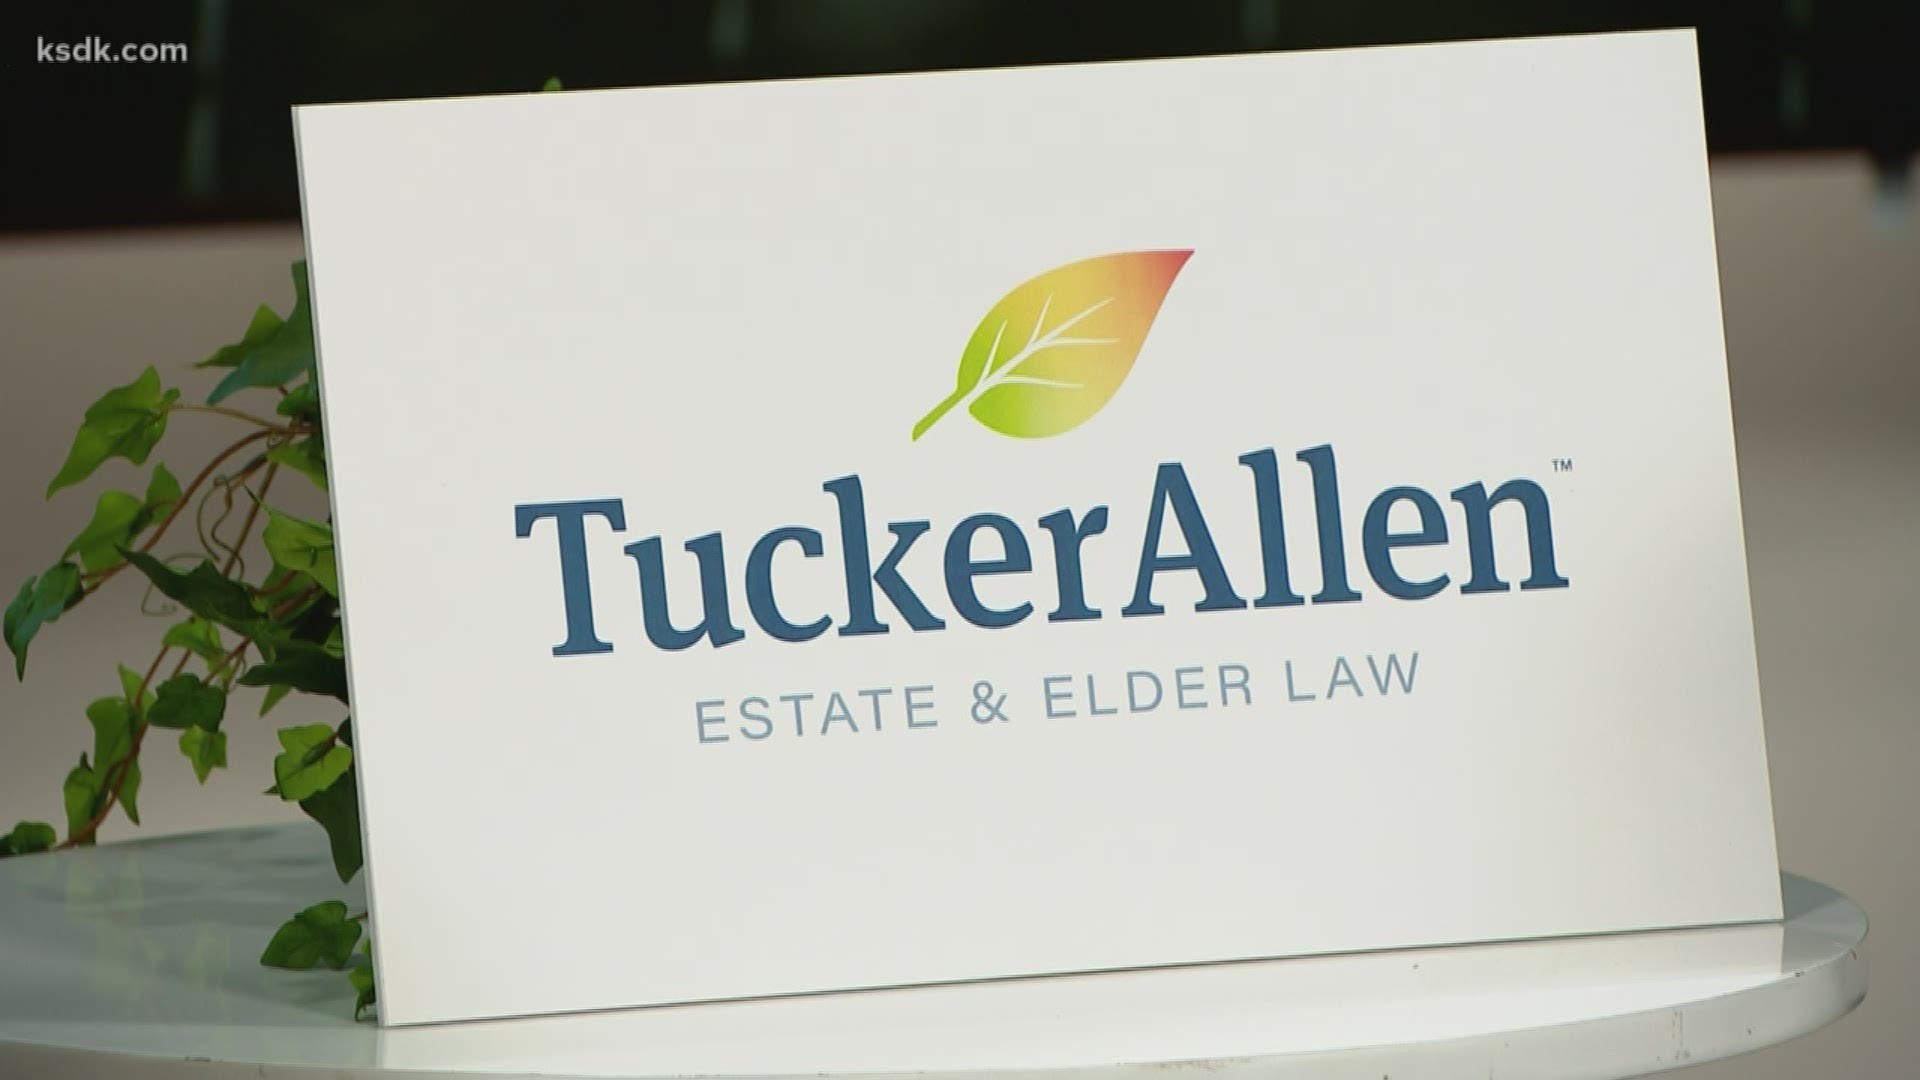 TuckerAllen is now even better able to help you plan for your future by joining forces with Cordell Planning Partners.